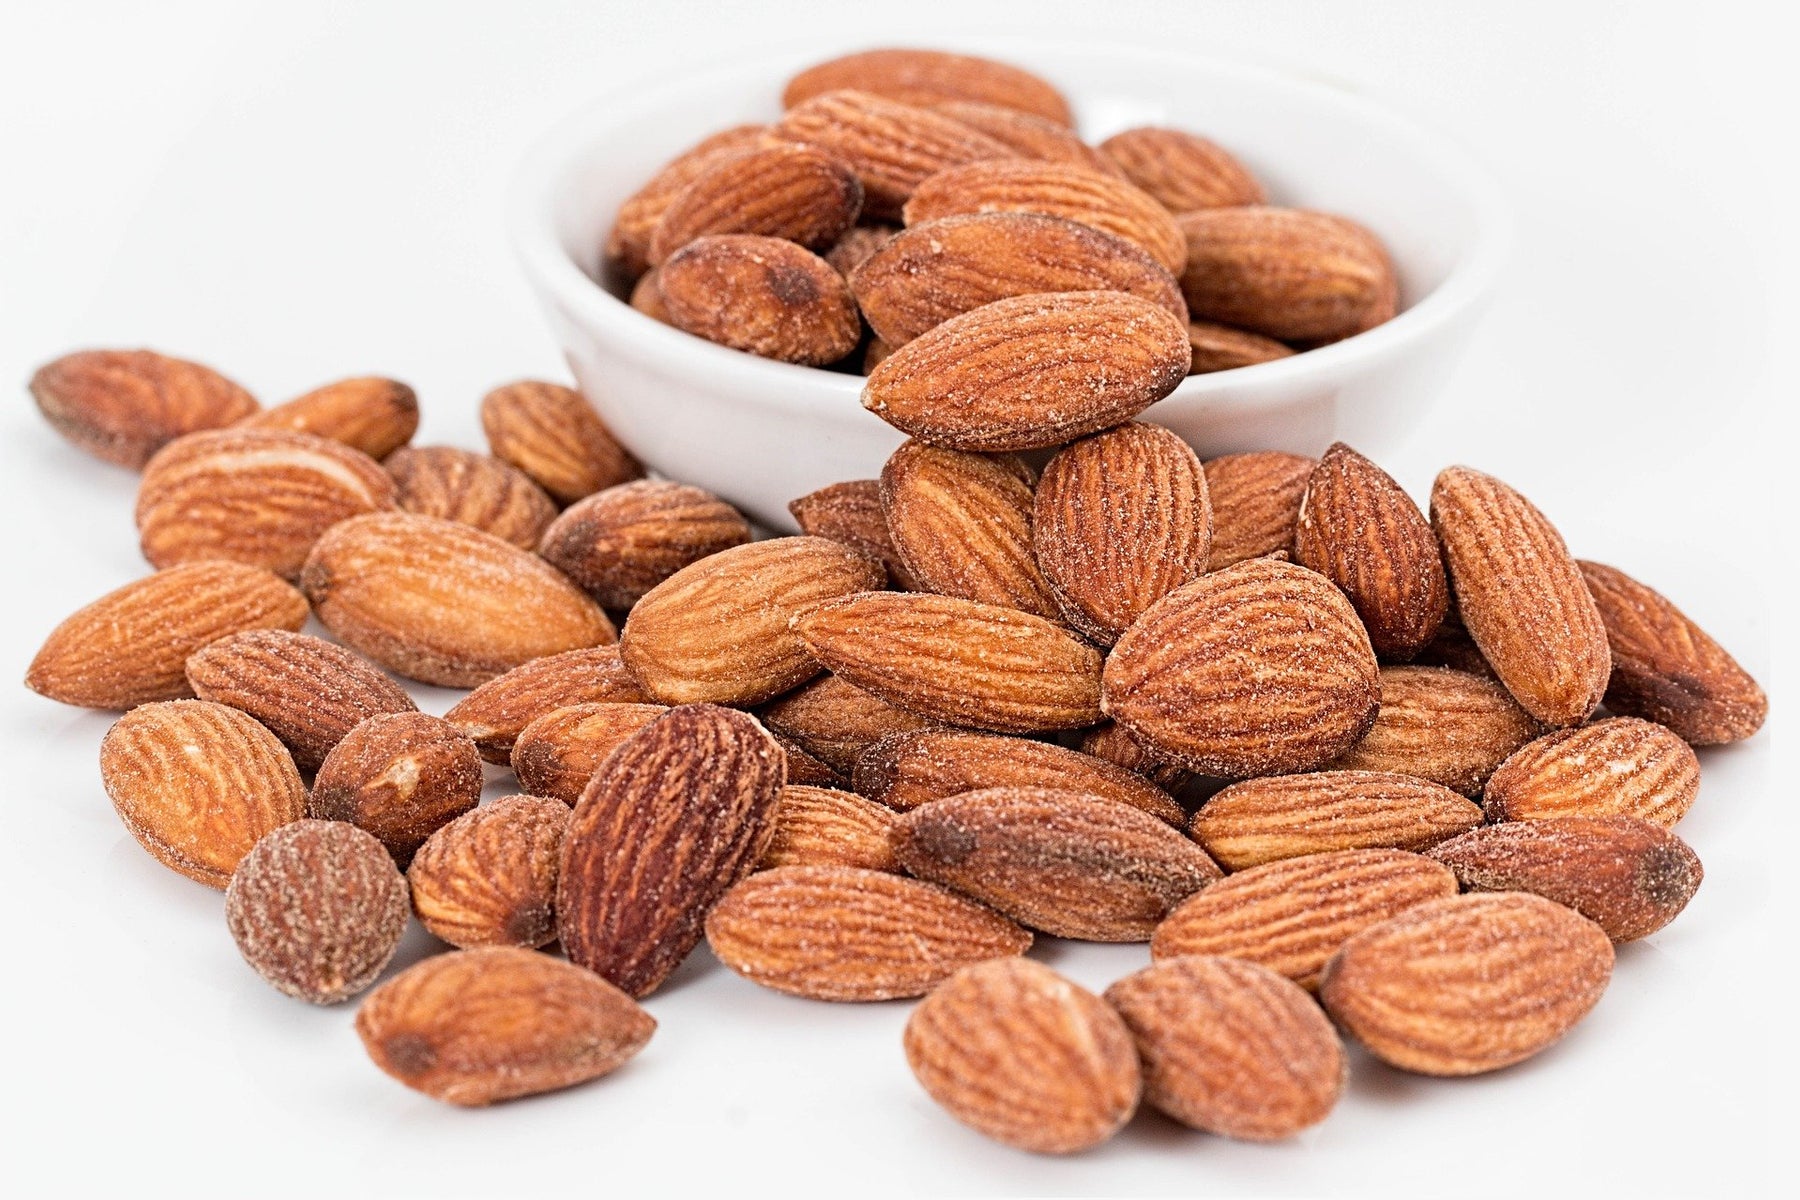 Almonds on a table next to almonds in a white small bowl